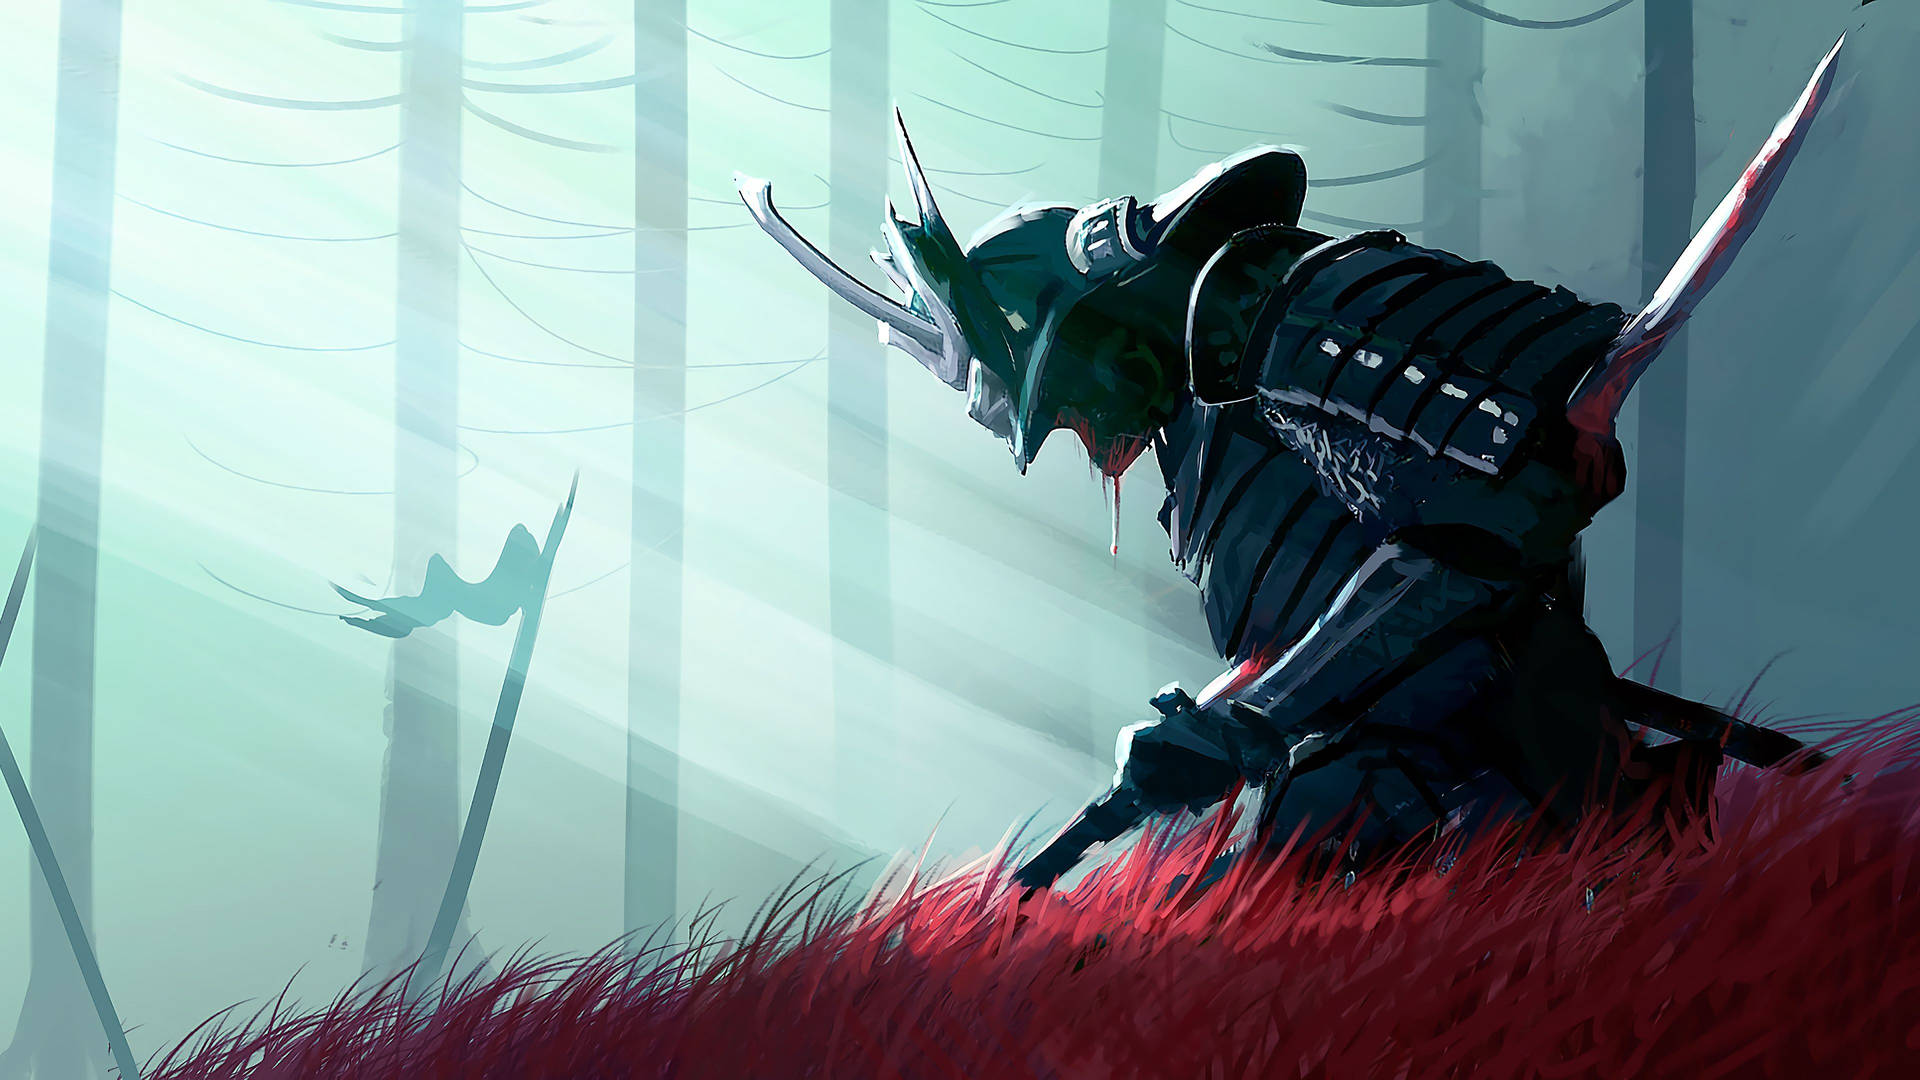 A Samurai In A Red Armor Standing In The Grass Wallpaper